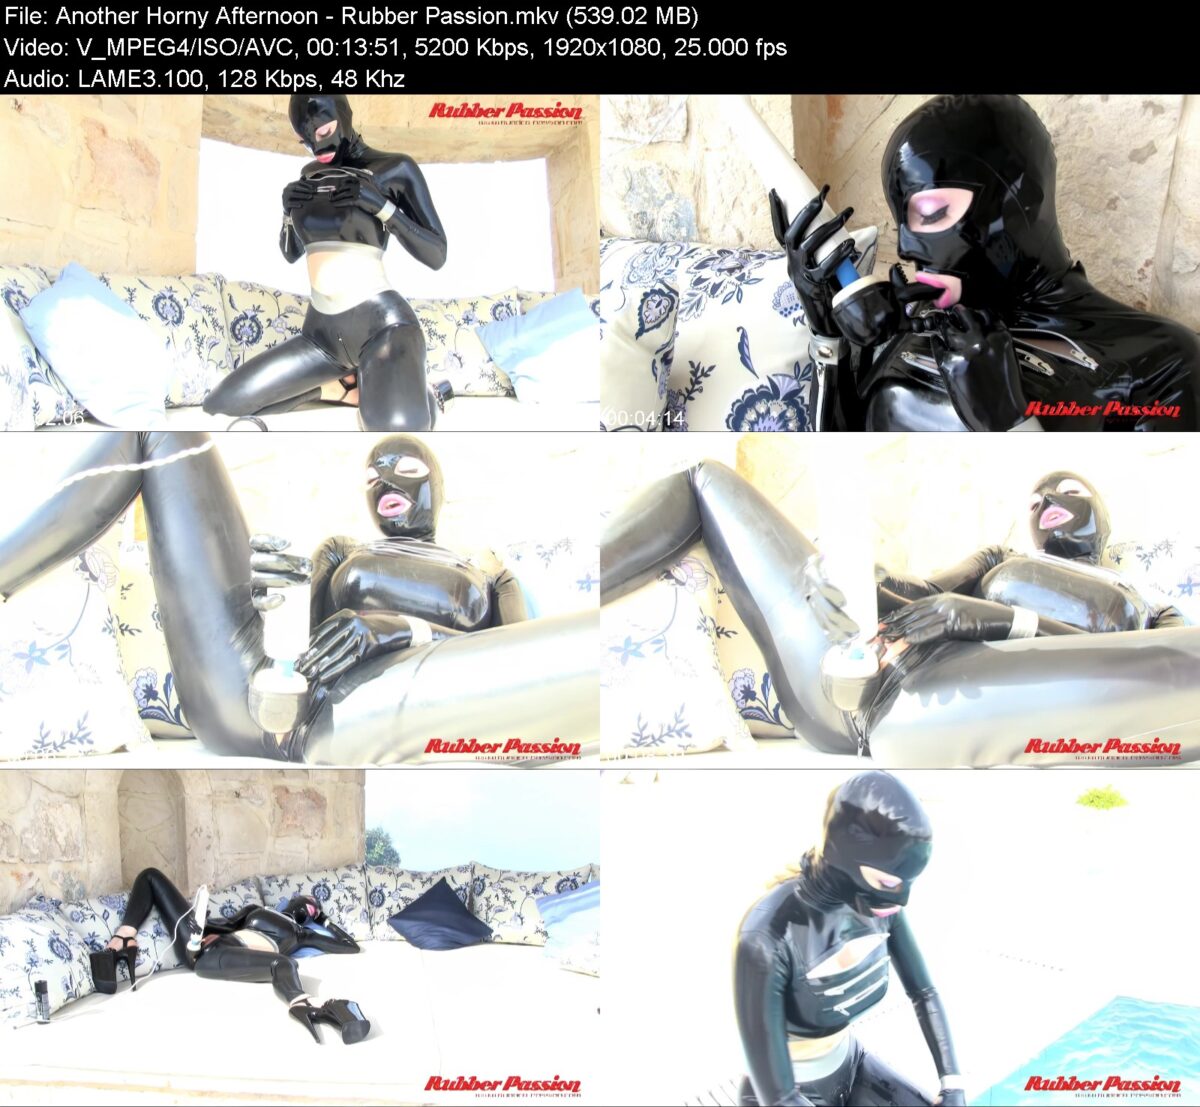 Another Horny Afternoon - Rubber Passion